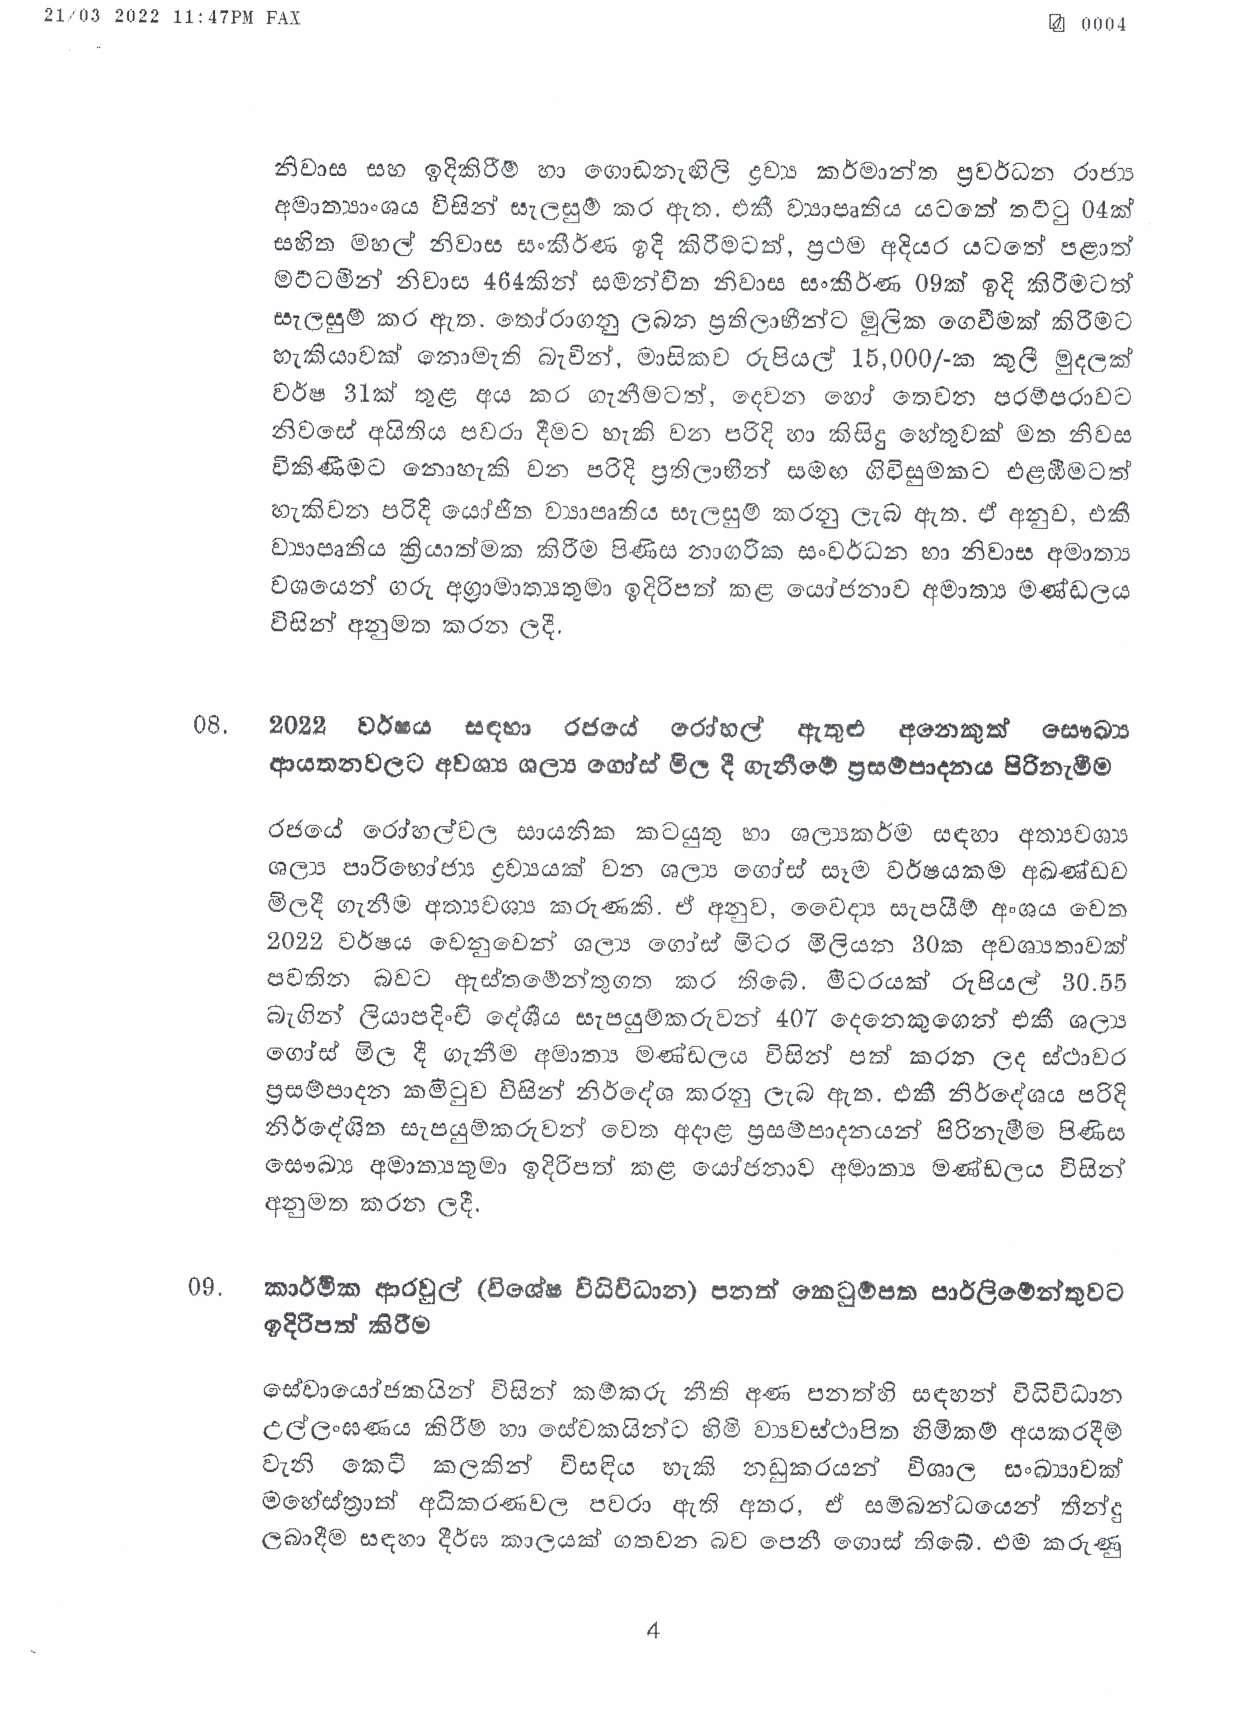 Cabinet Decisions on 21.03.2022 page 004